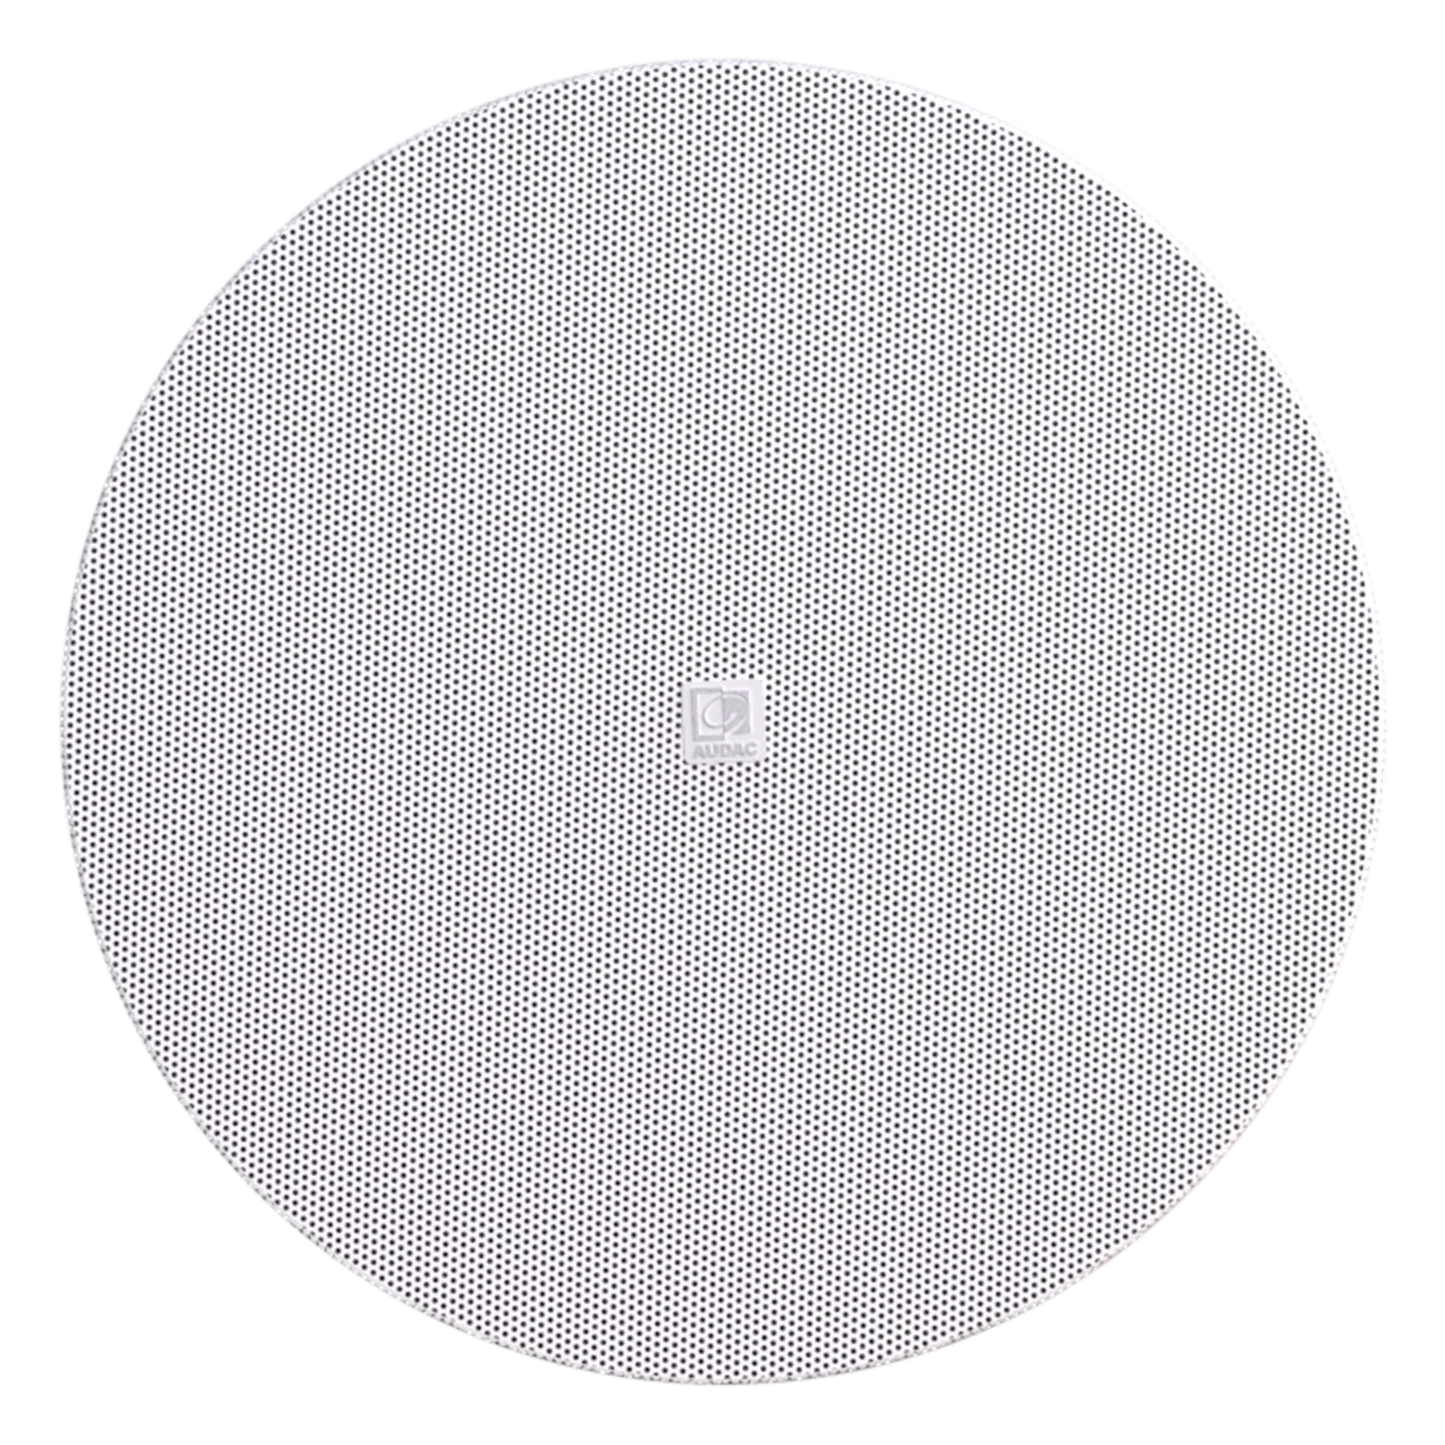 CIRA530D 2-way 5 1/4" ceiling speaker with QuickFit™ and TwistFix™ grill, White version, 16 Ω